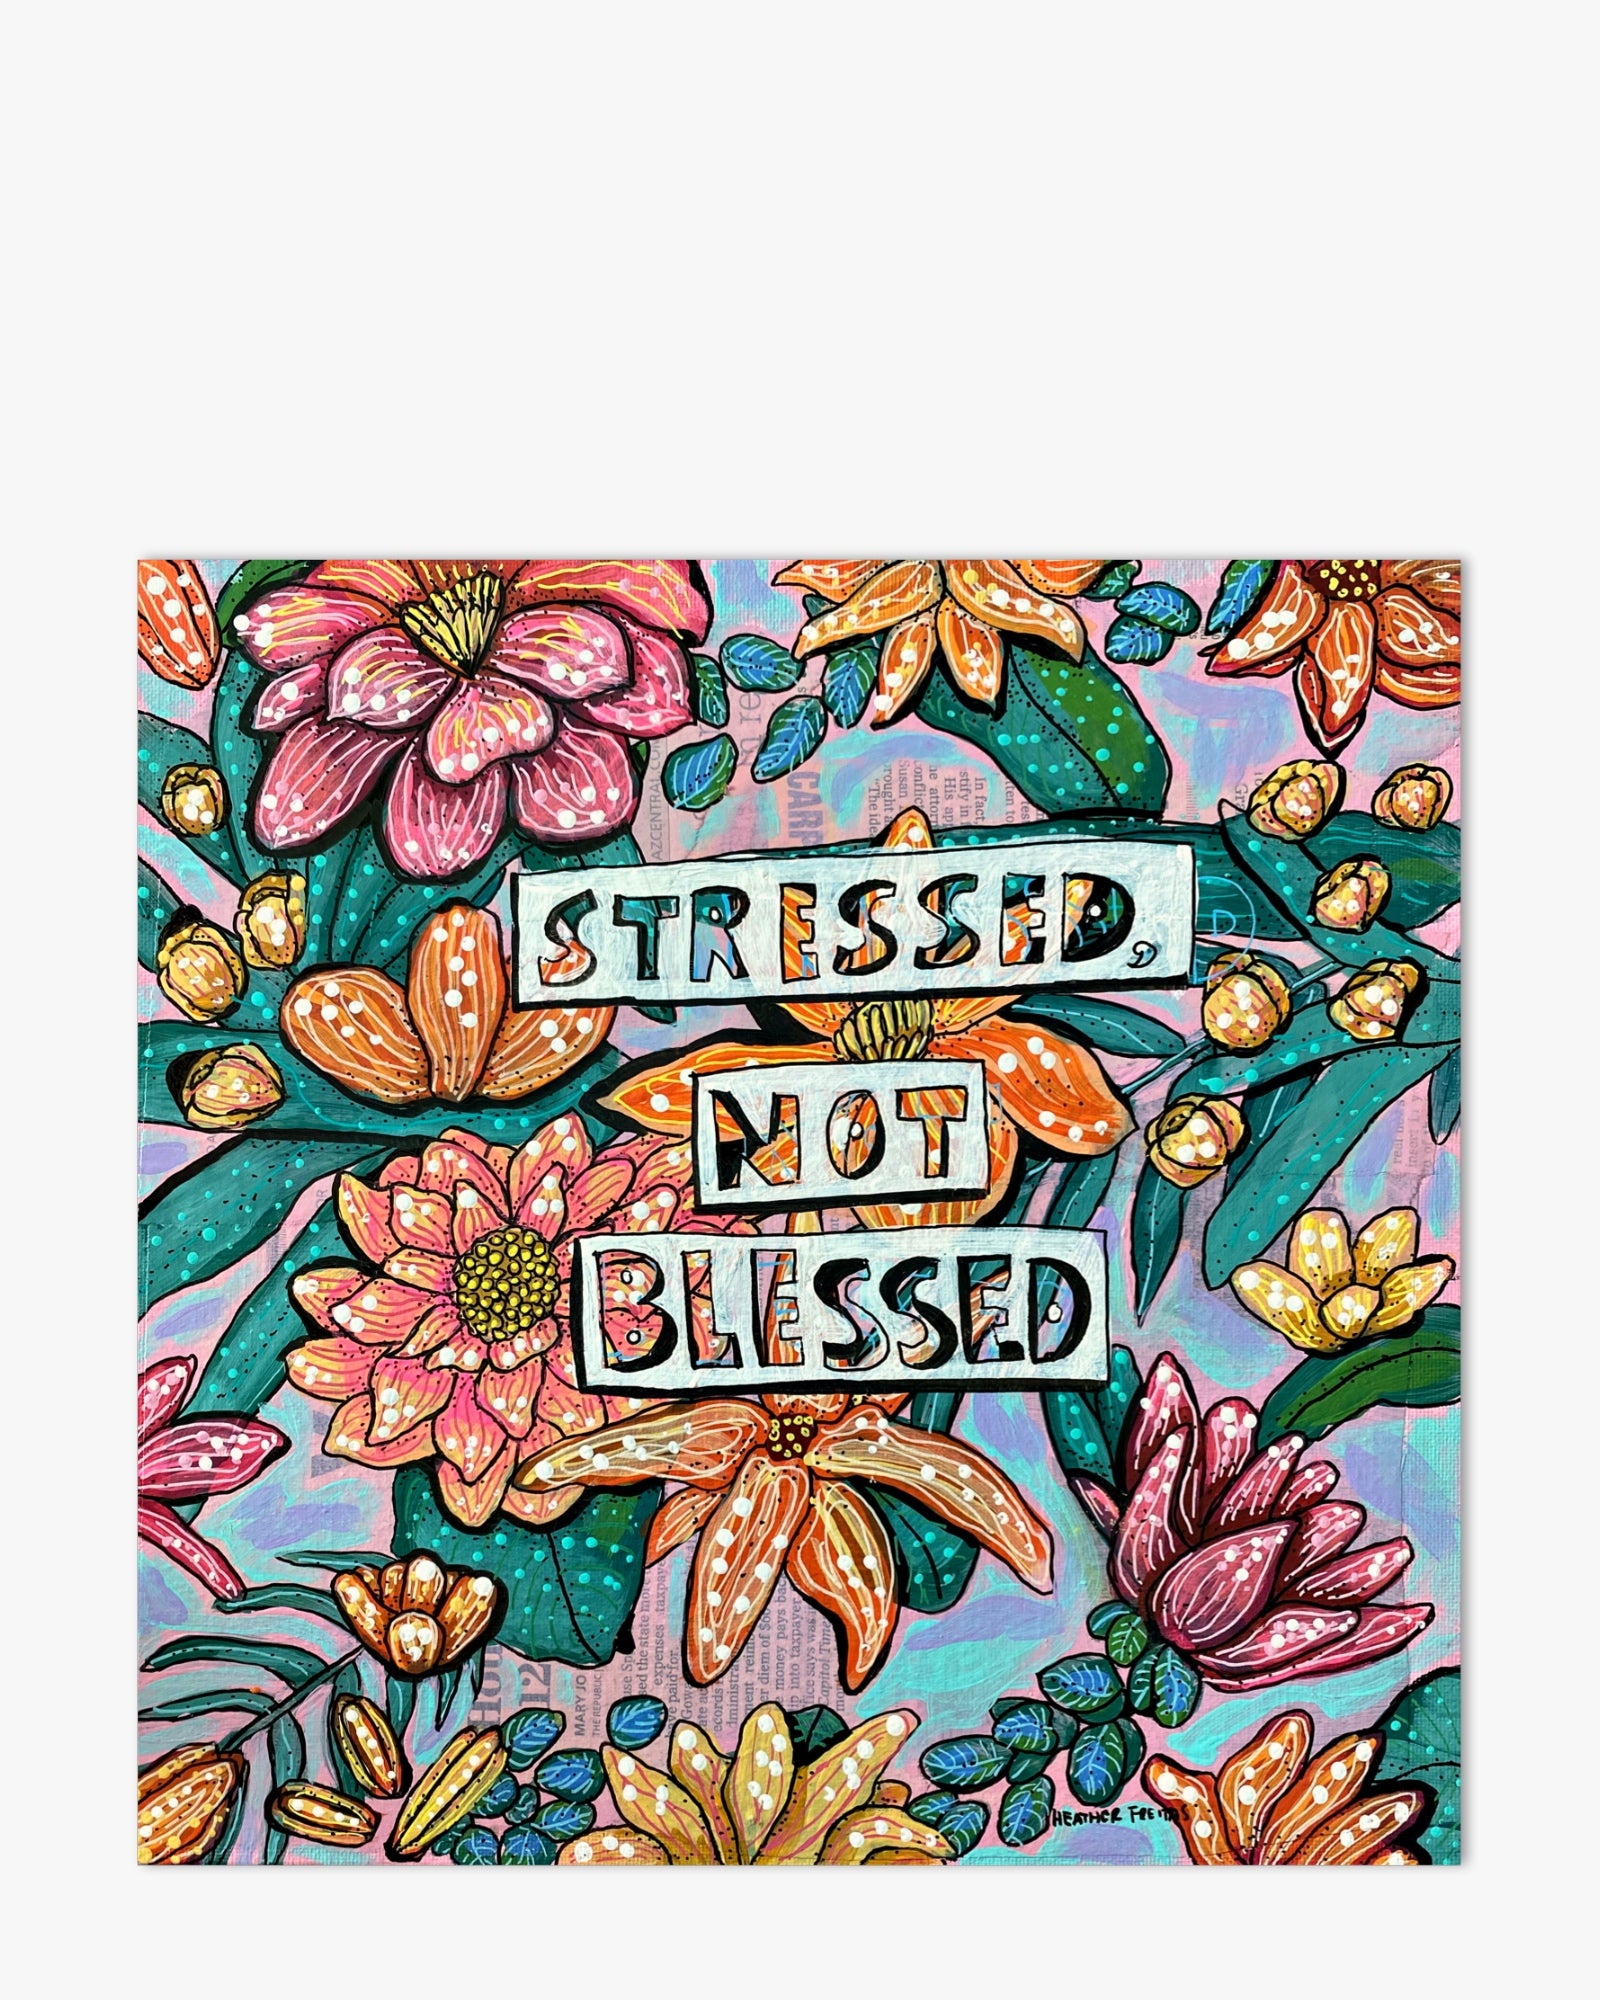 Stressed, Not Blessed ( Original Painting )